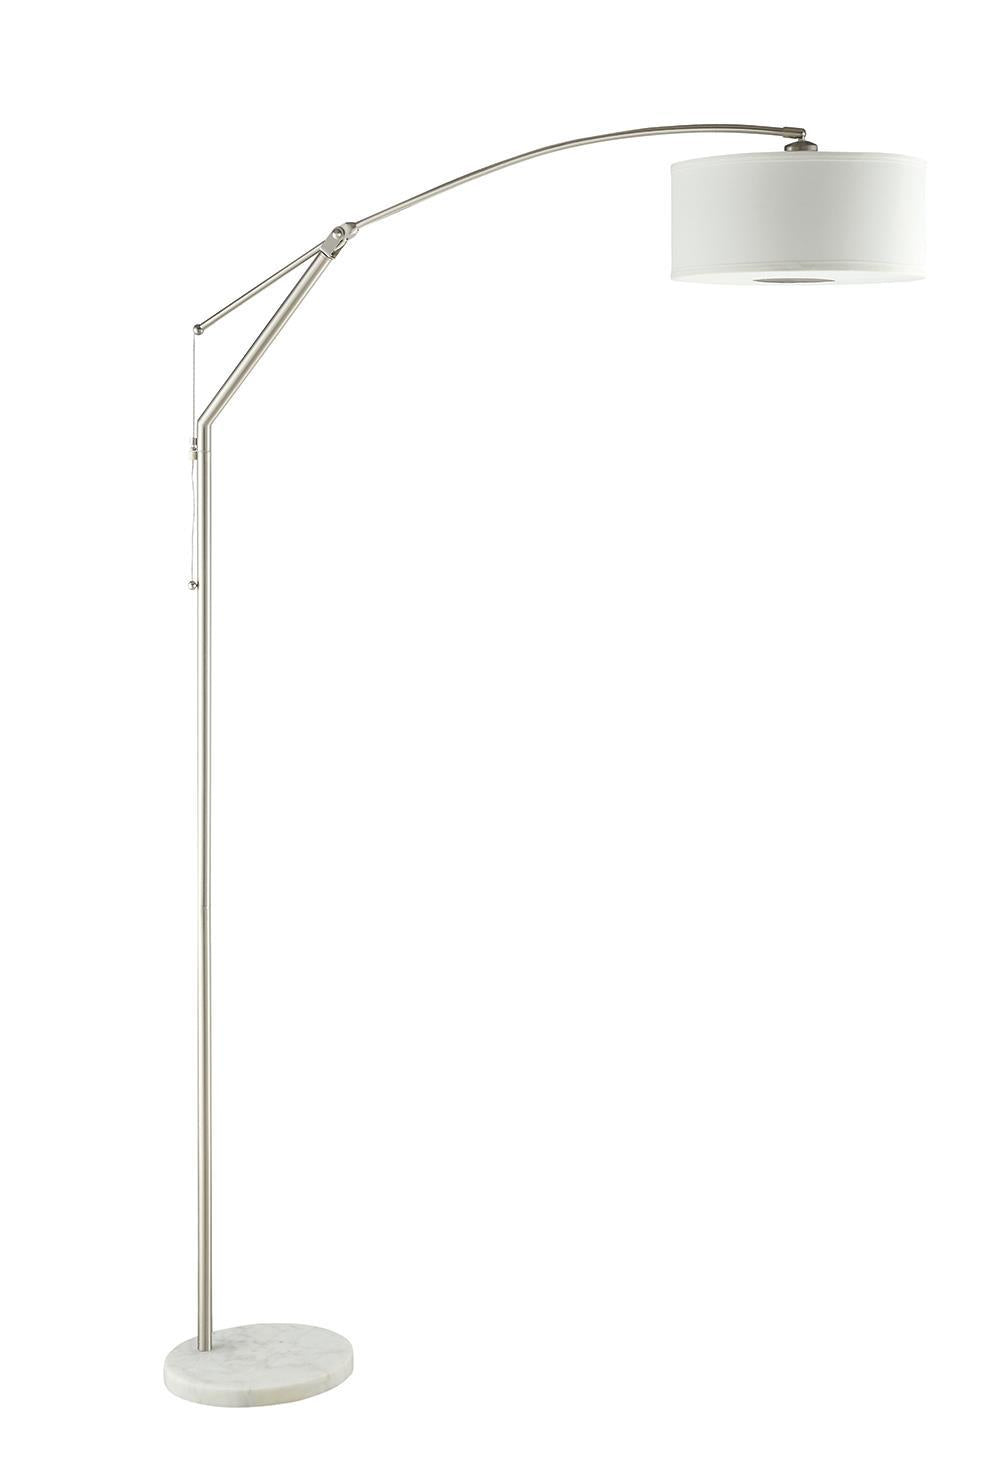 G901490 Contemporary White and Chrome Floor Lamp